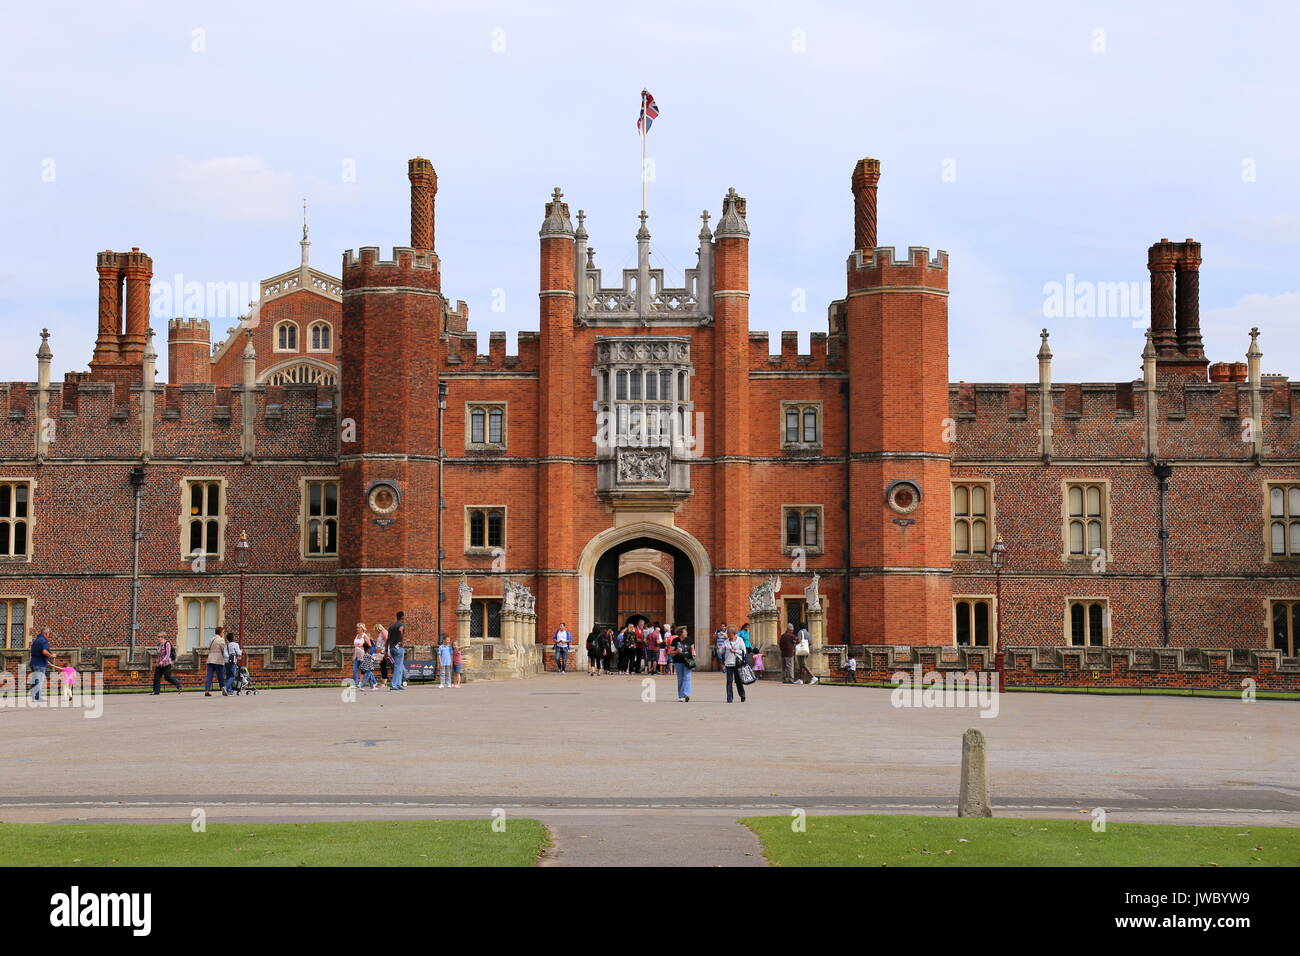 West Gate Hampton Court Palace East Molesey Surrey England Great